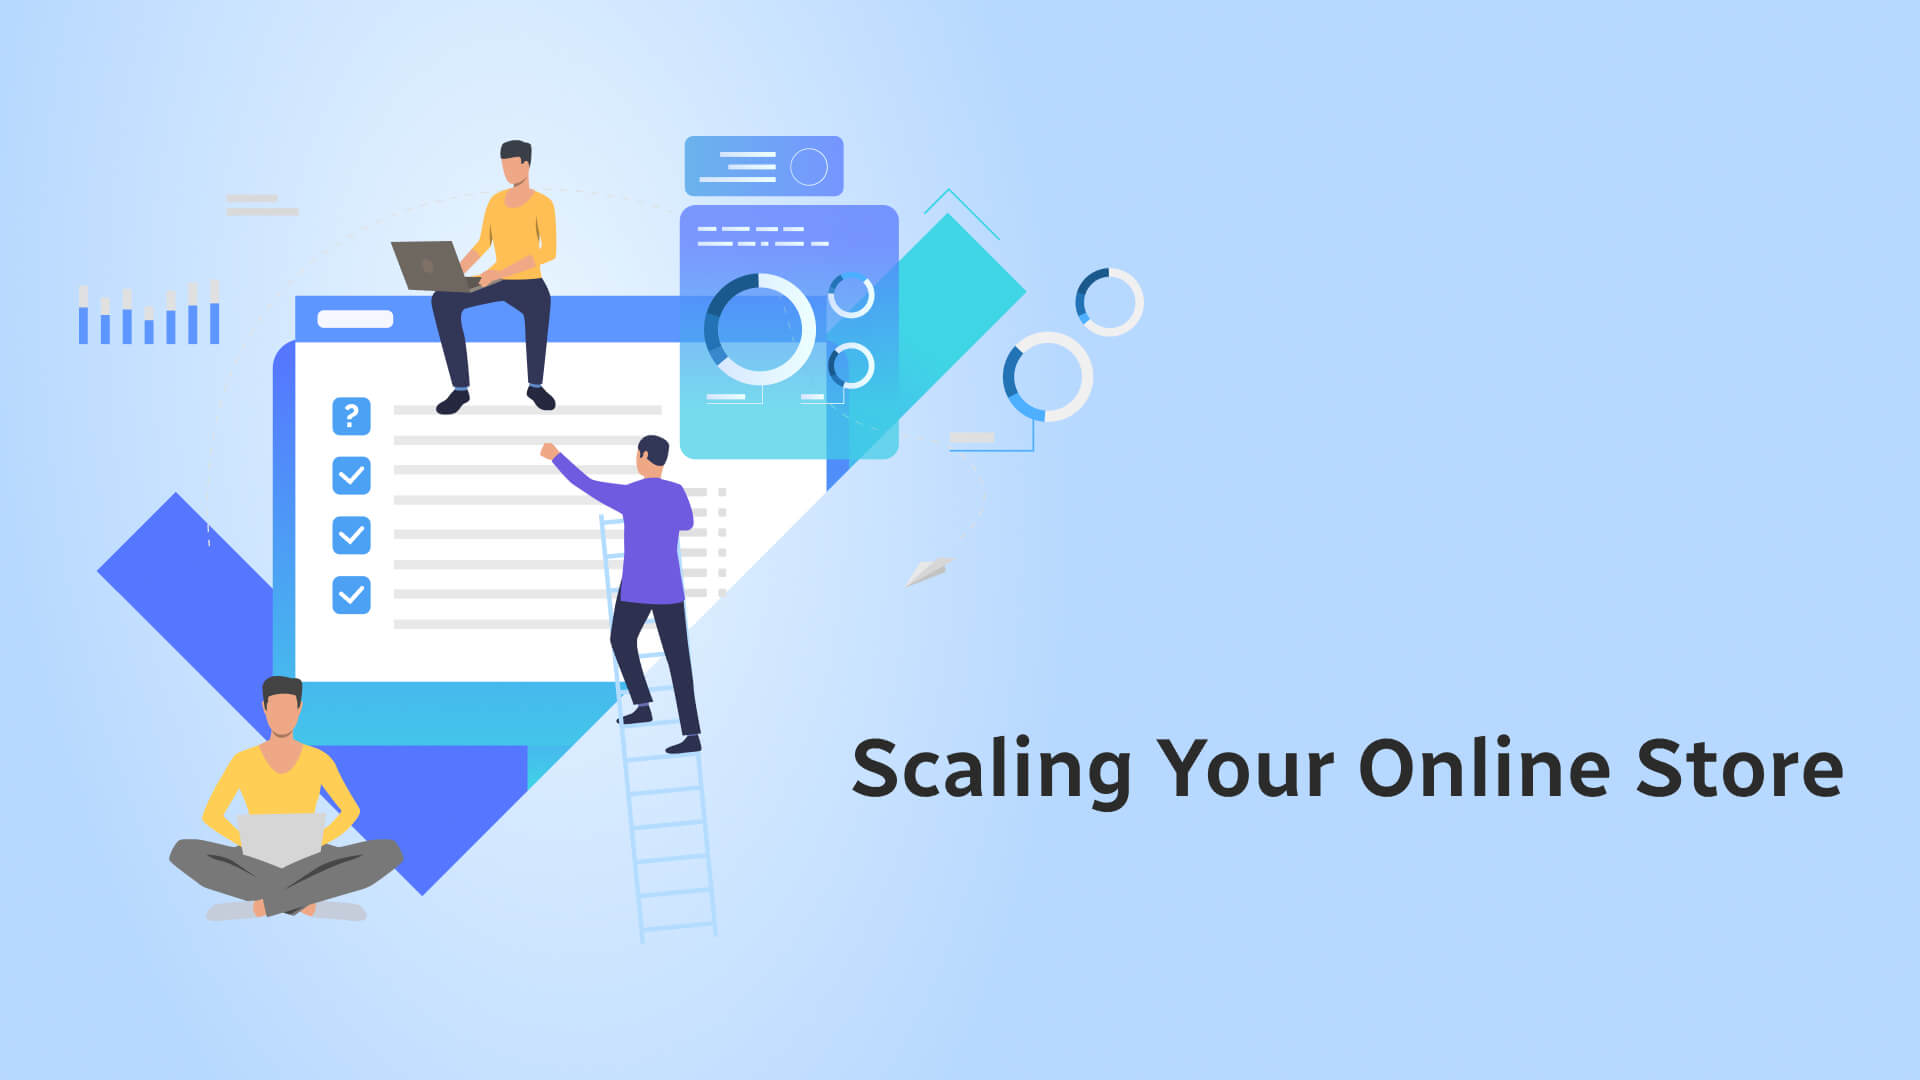 Scaling Your Online Store